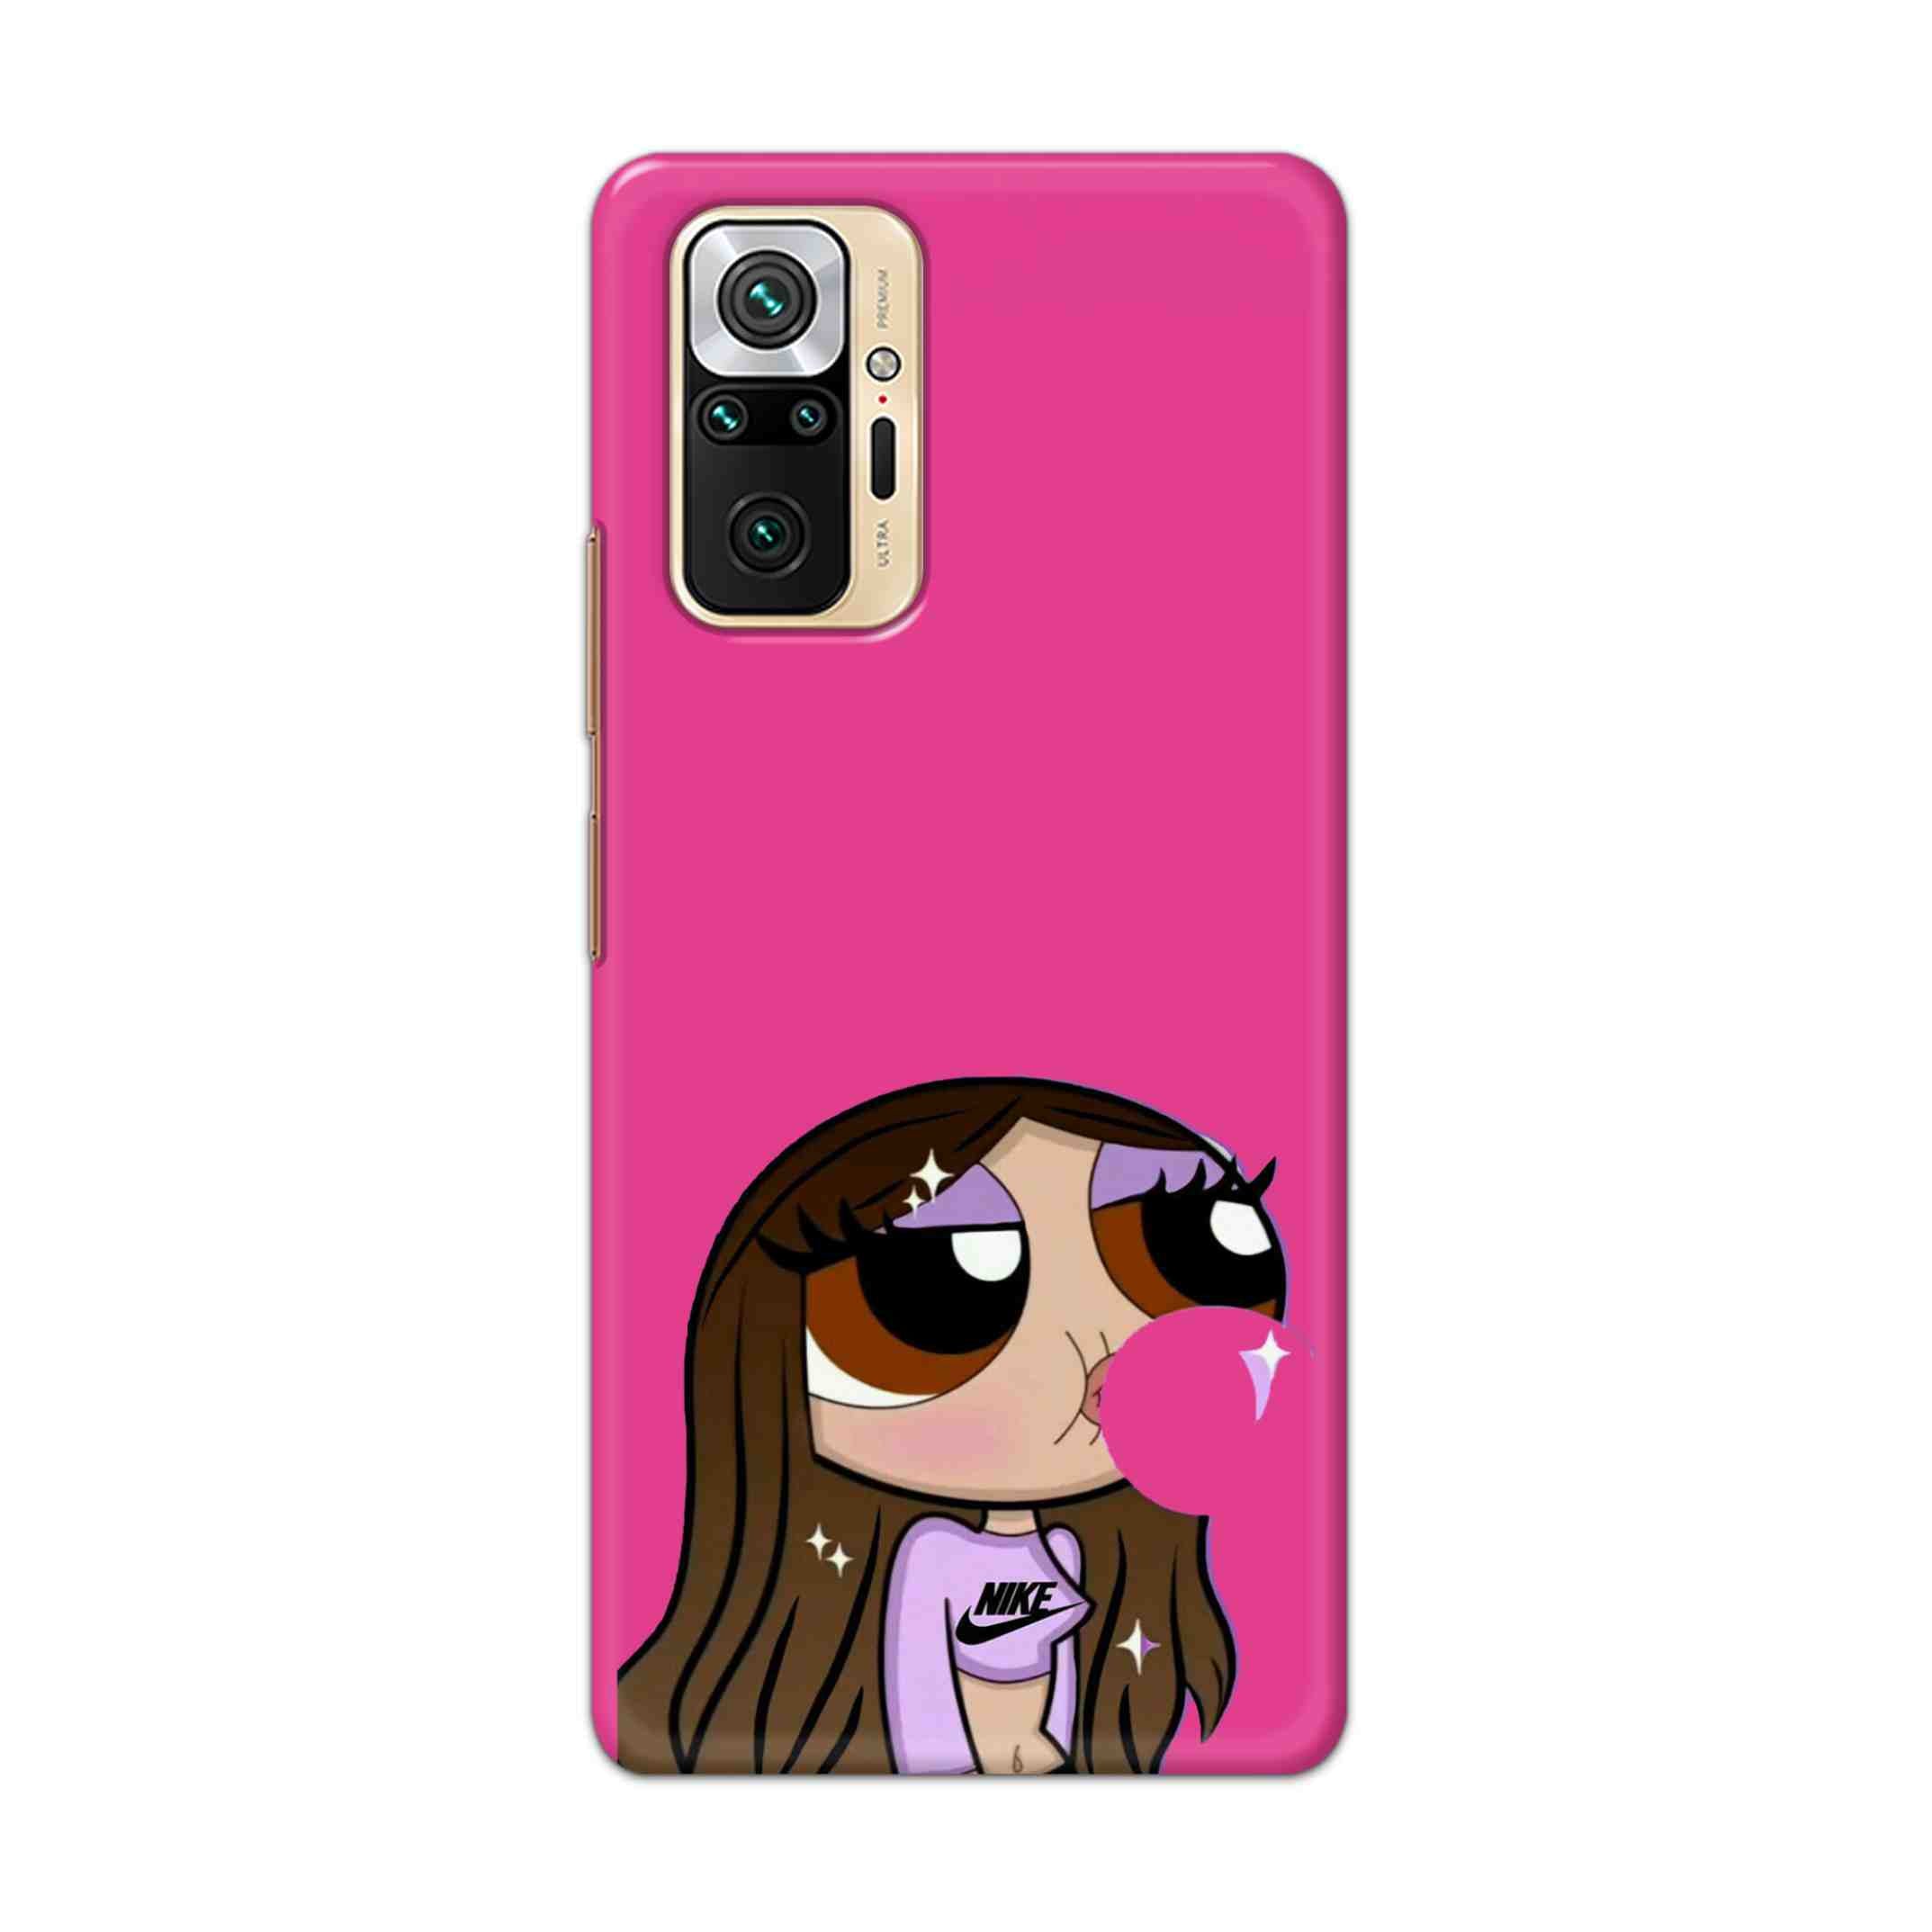 Buy Bubble Girl Hard Back Mobile Phone Case Cover For Redmi Note 10 Pro Online